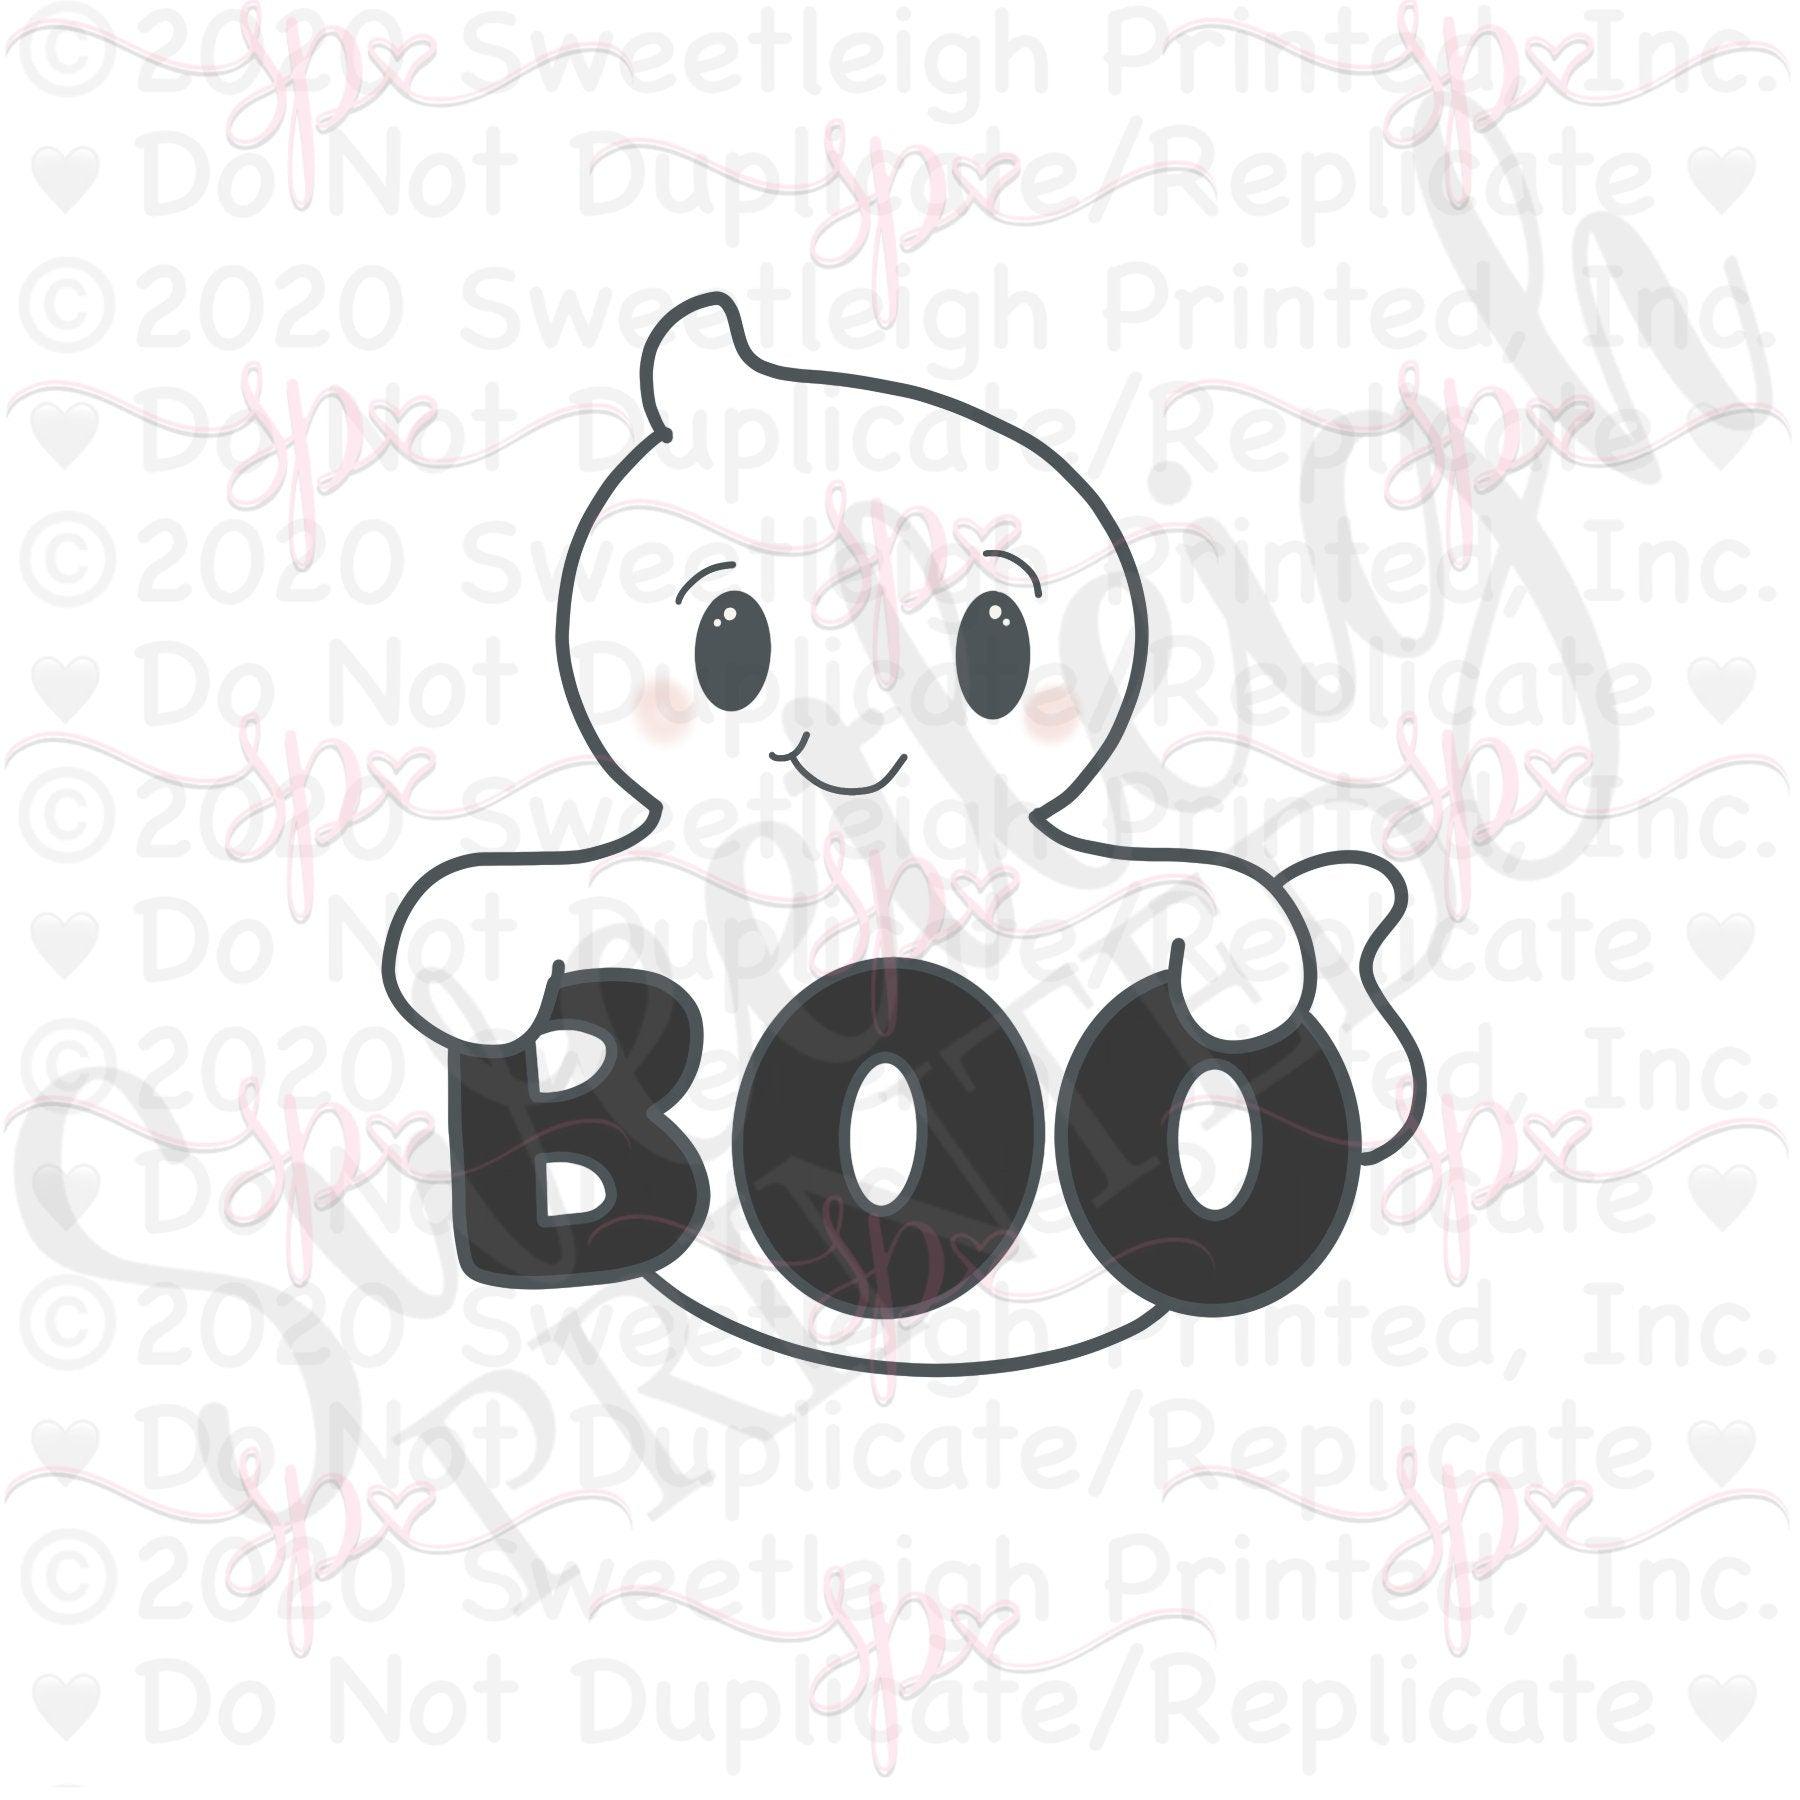 Friendly BOO Ghost Cookie Cutter - Sweetleigh 